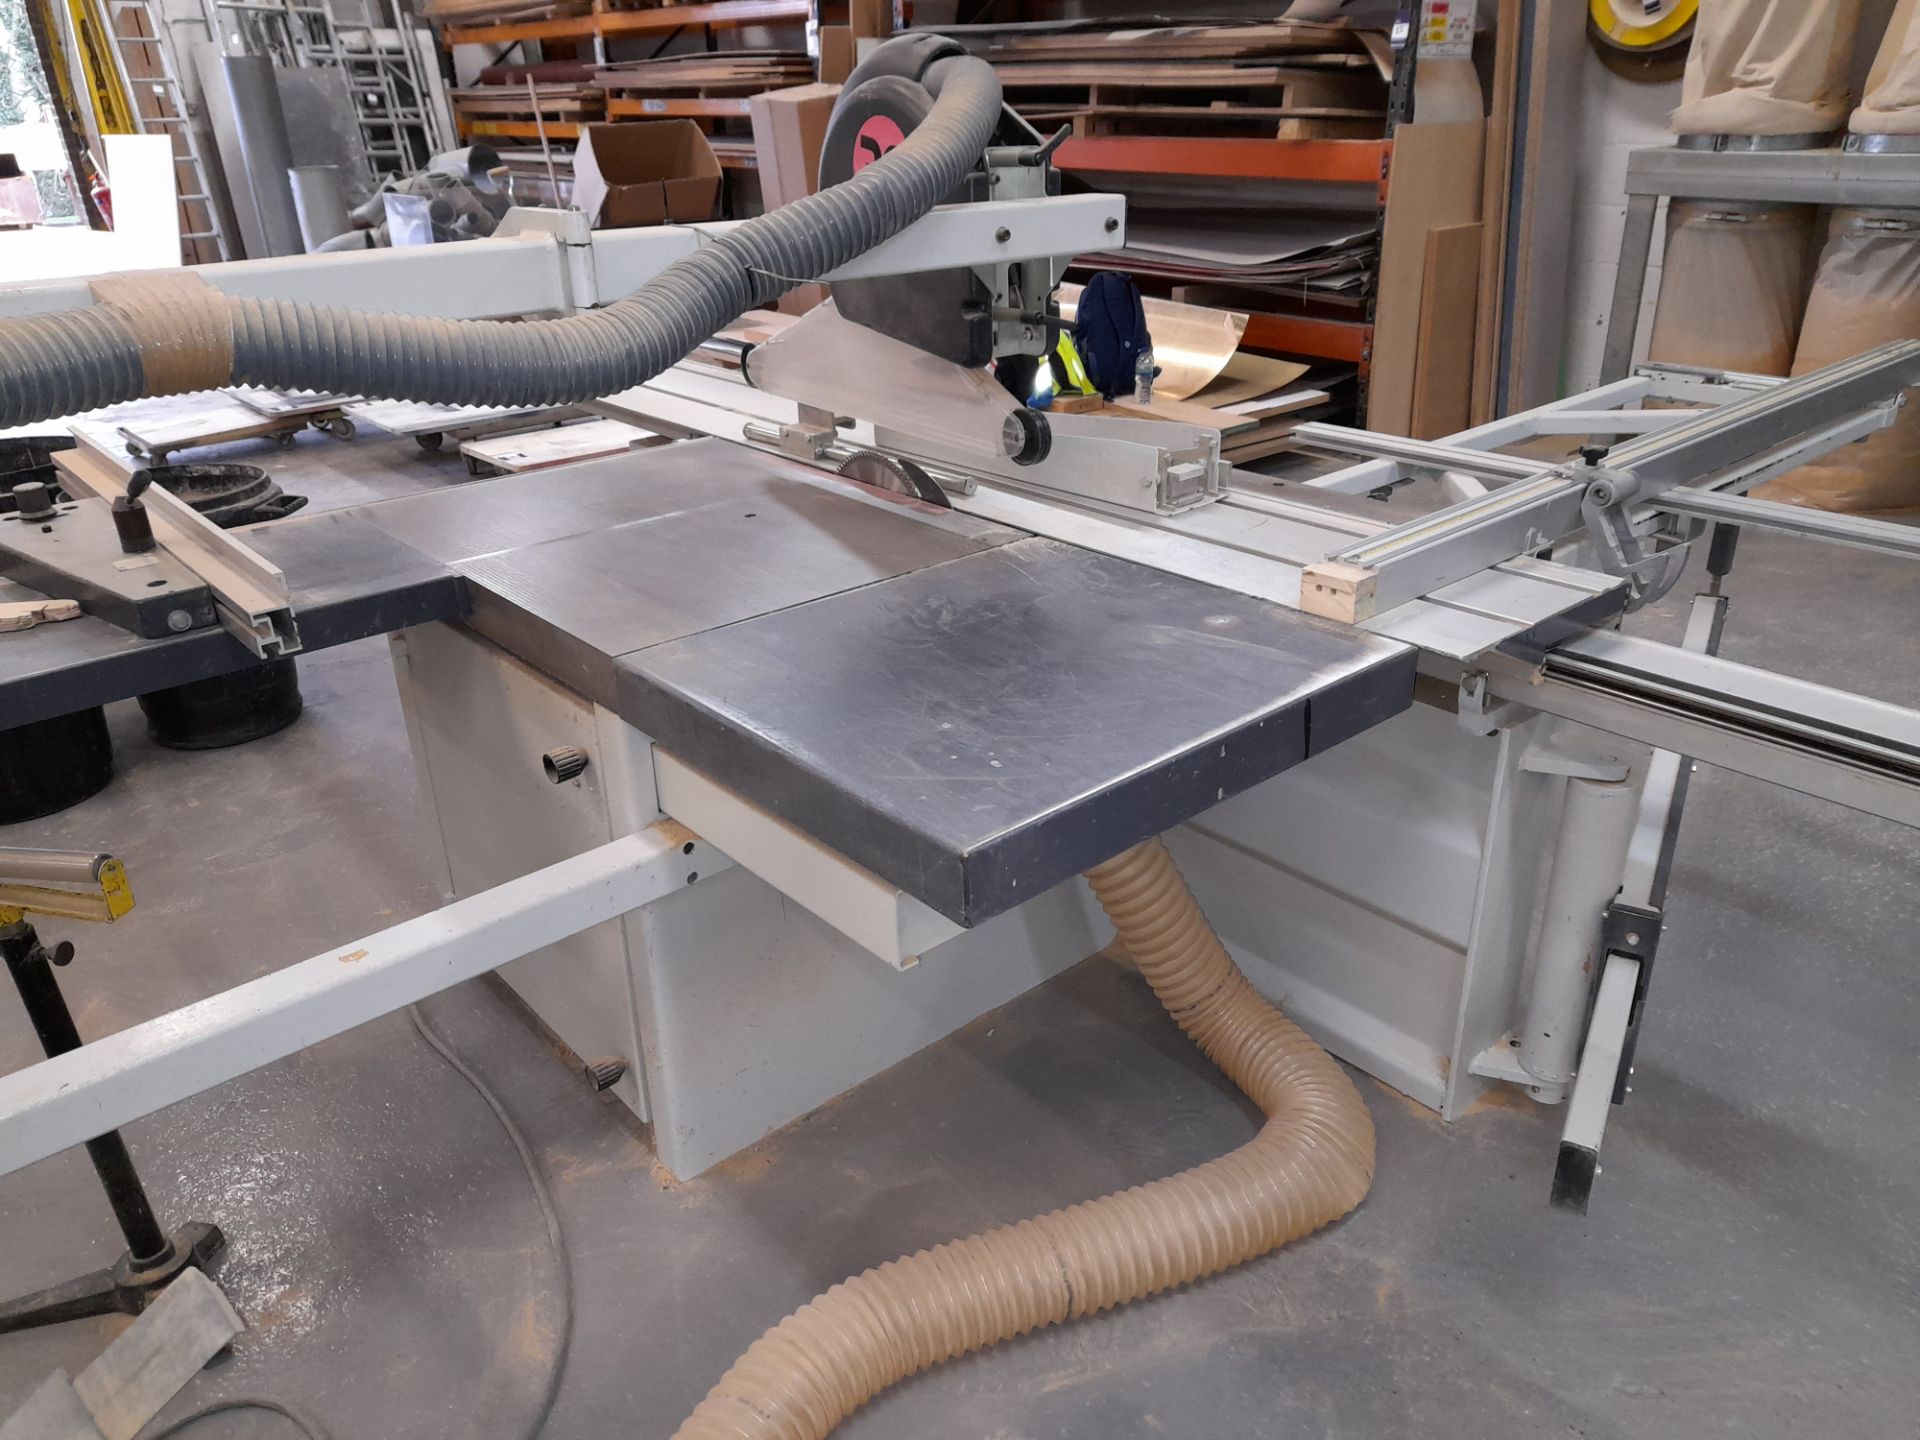 Roland Z320 panel saw, estimated year of manufacture 2005 - Image 4 of 5